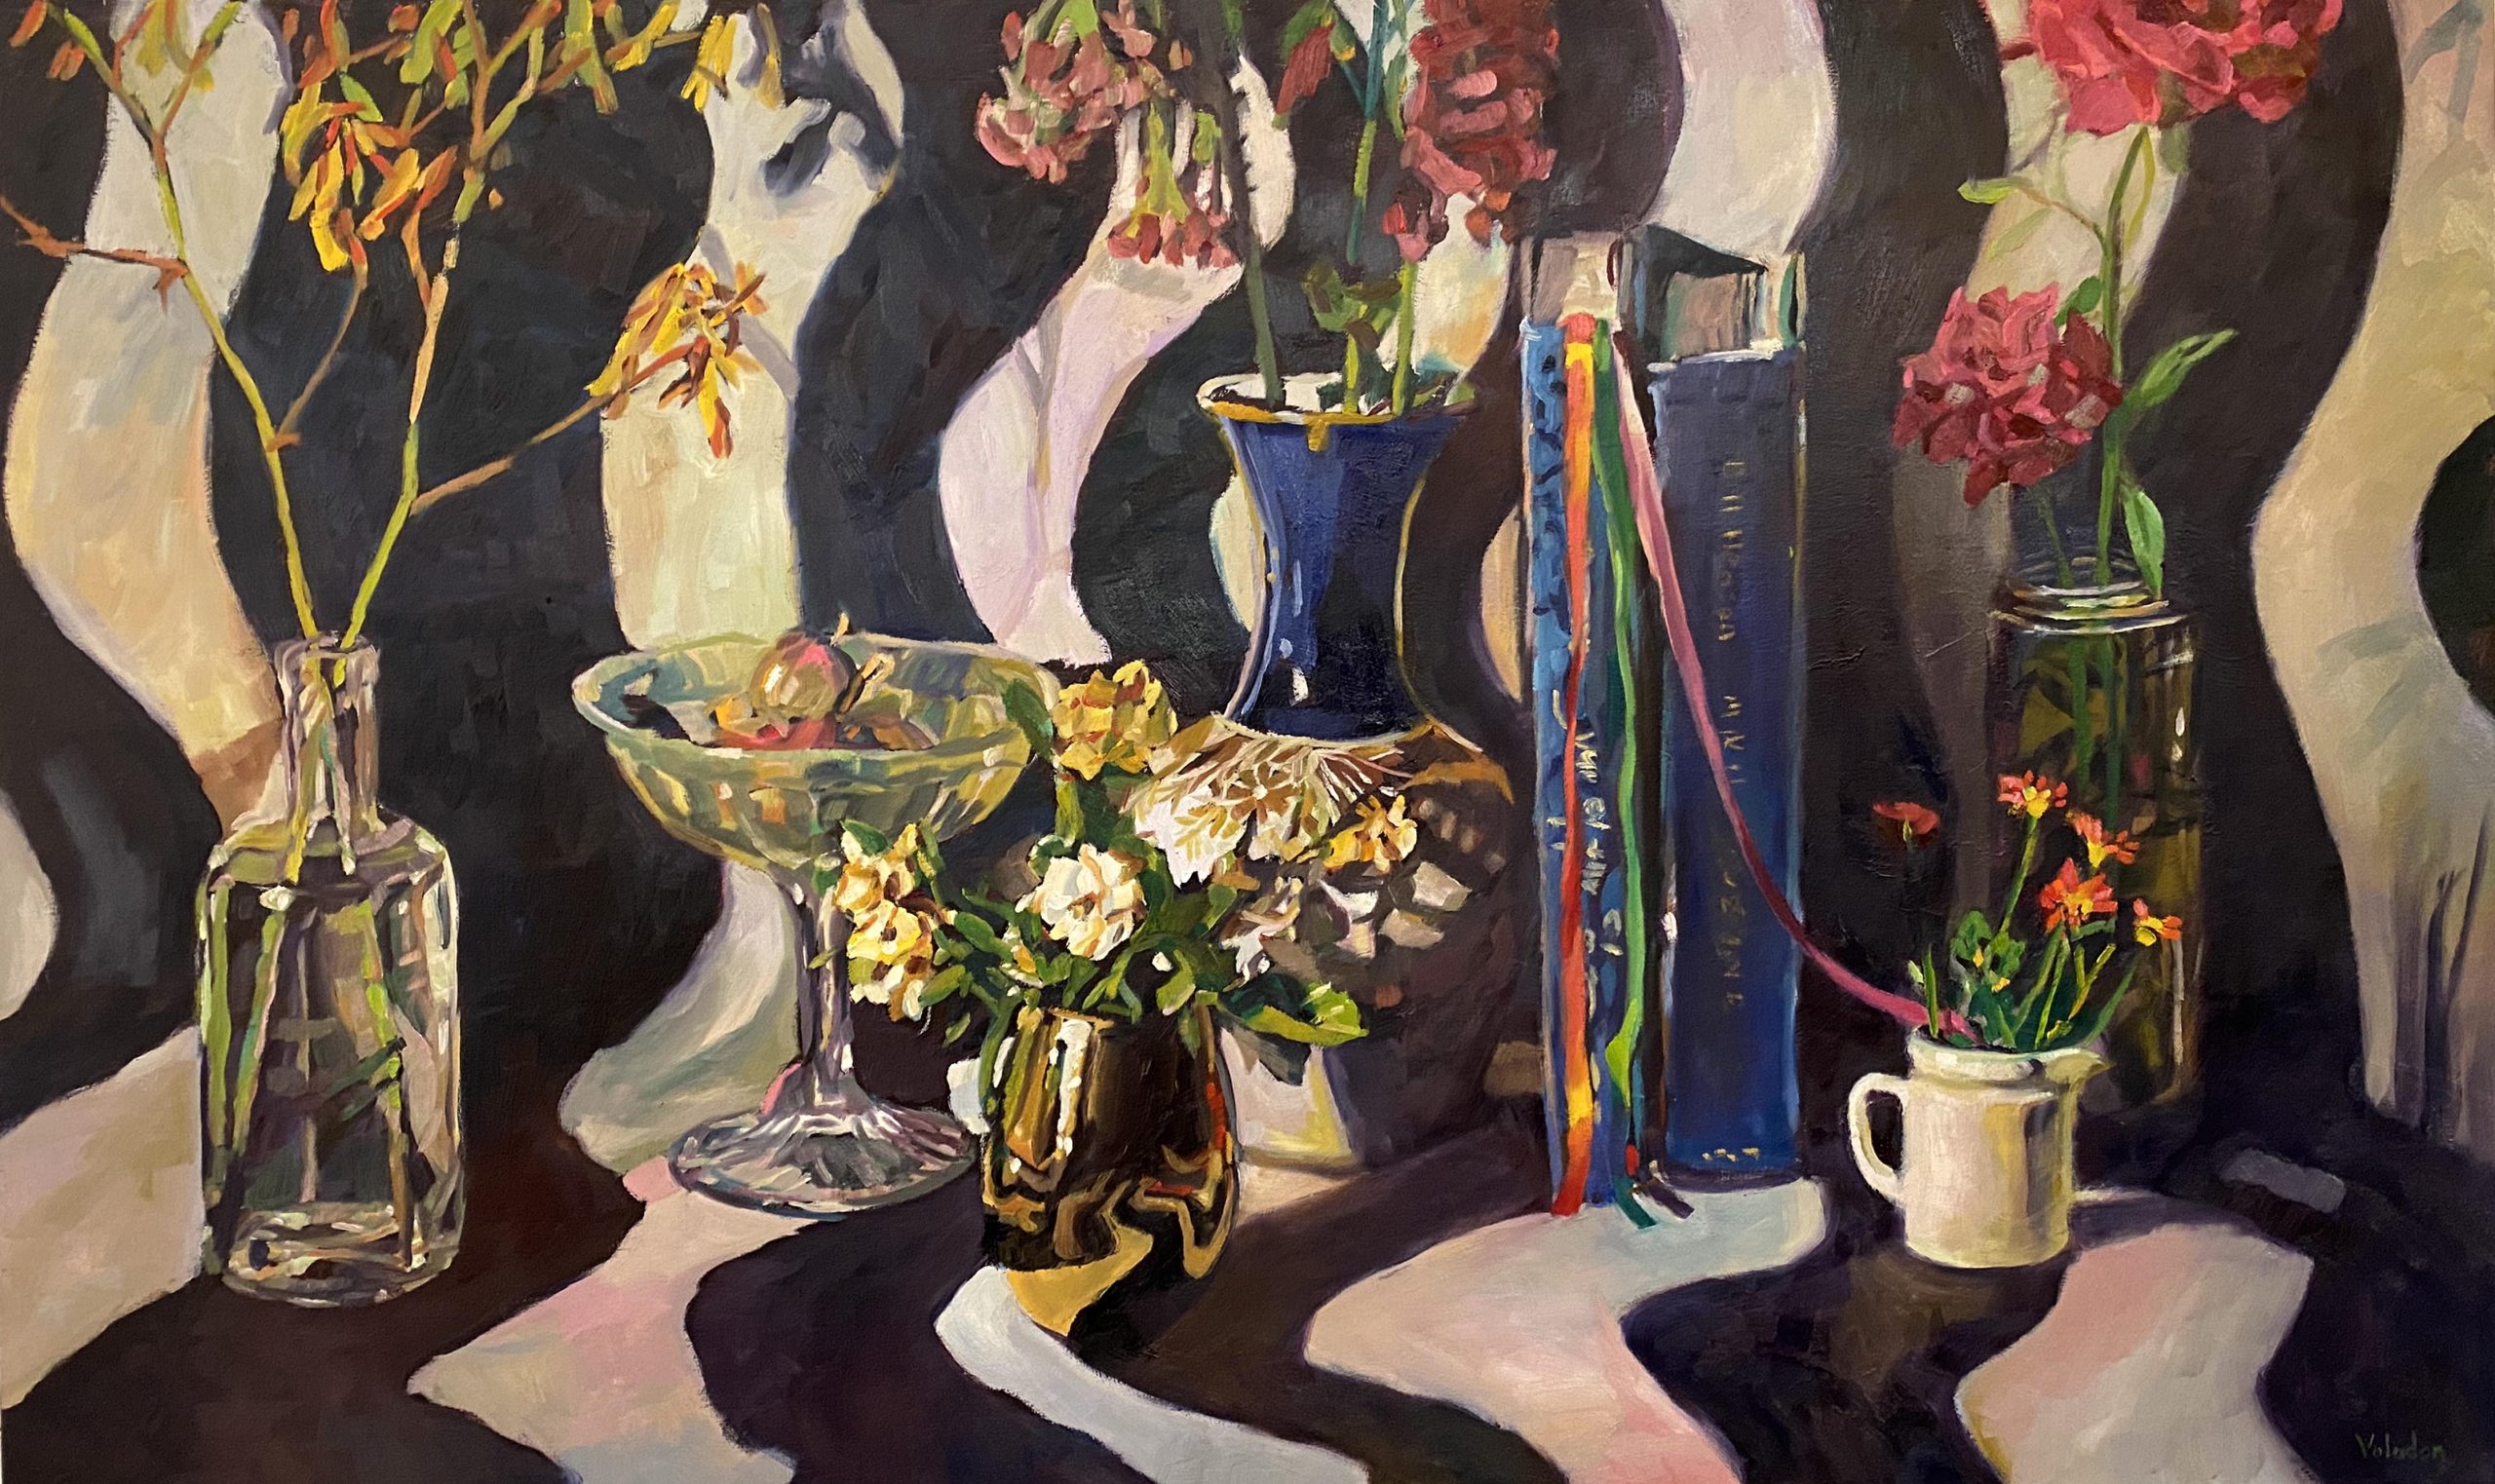 Rosemary Valadon 'On the Table' oil on canvas 91 x 152cm $26,500